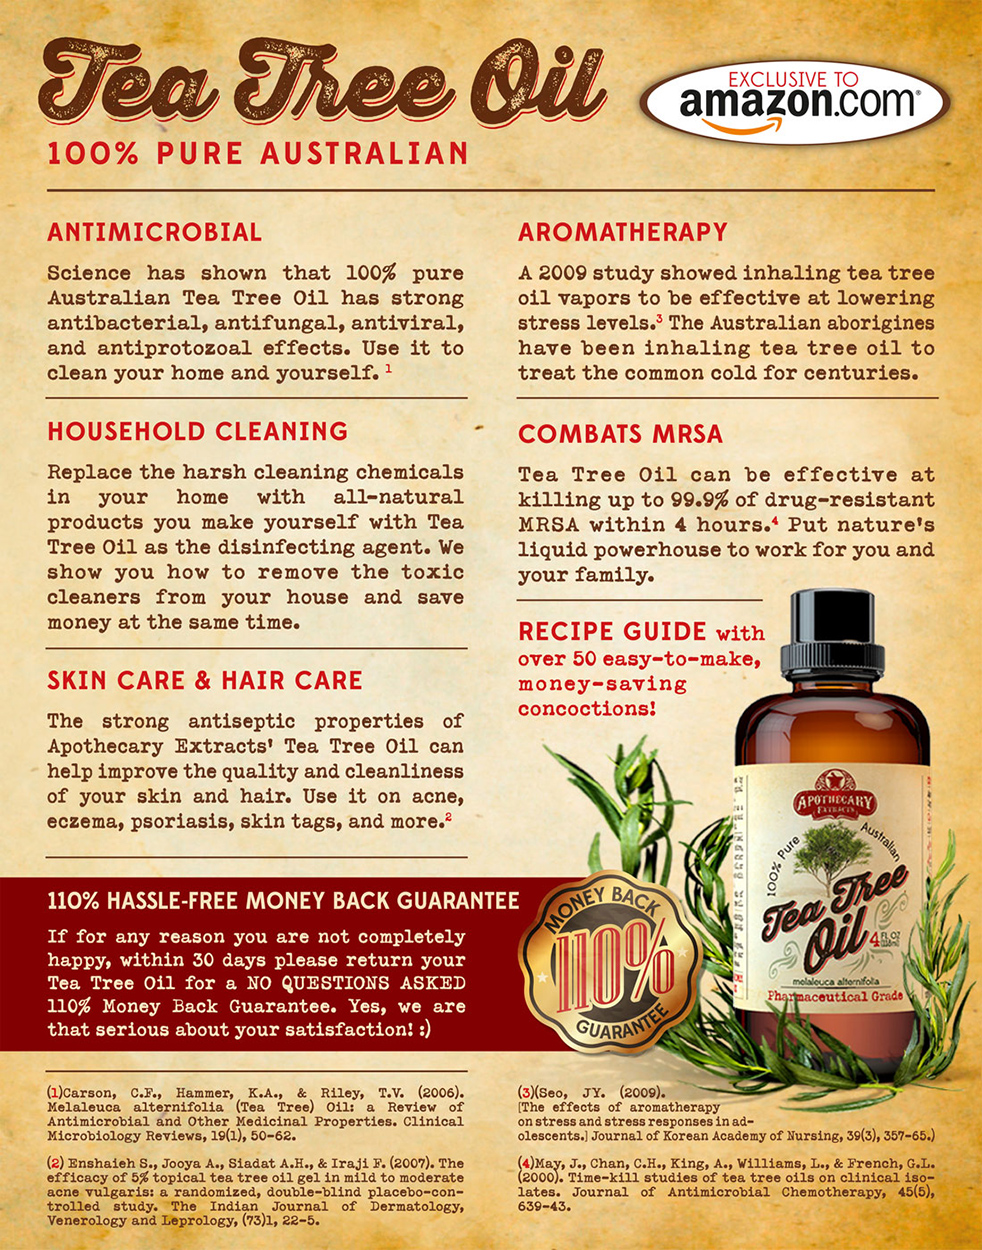 Apothecary Extracts 100% Pure Australian Tea Tree Oil - of Crazy